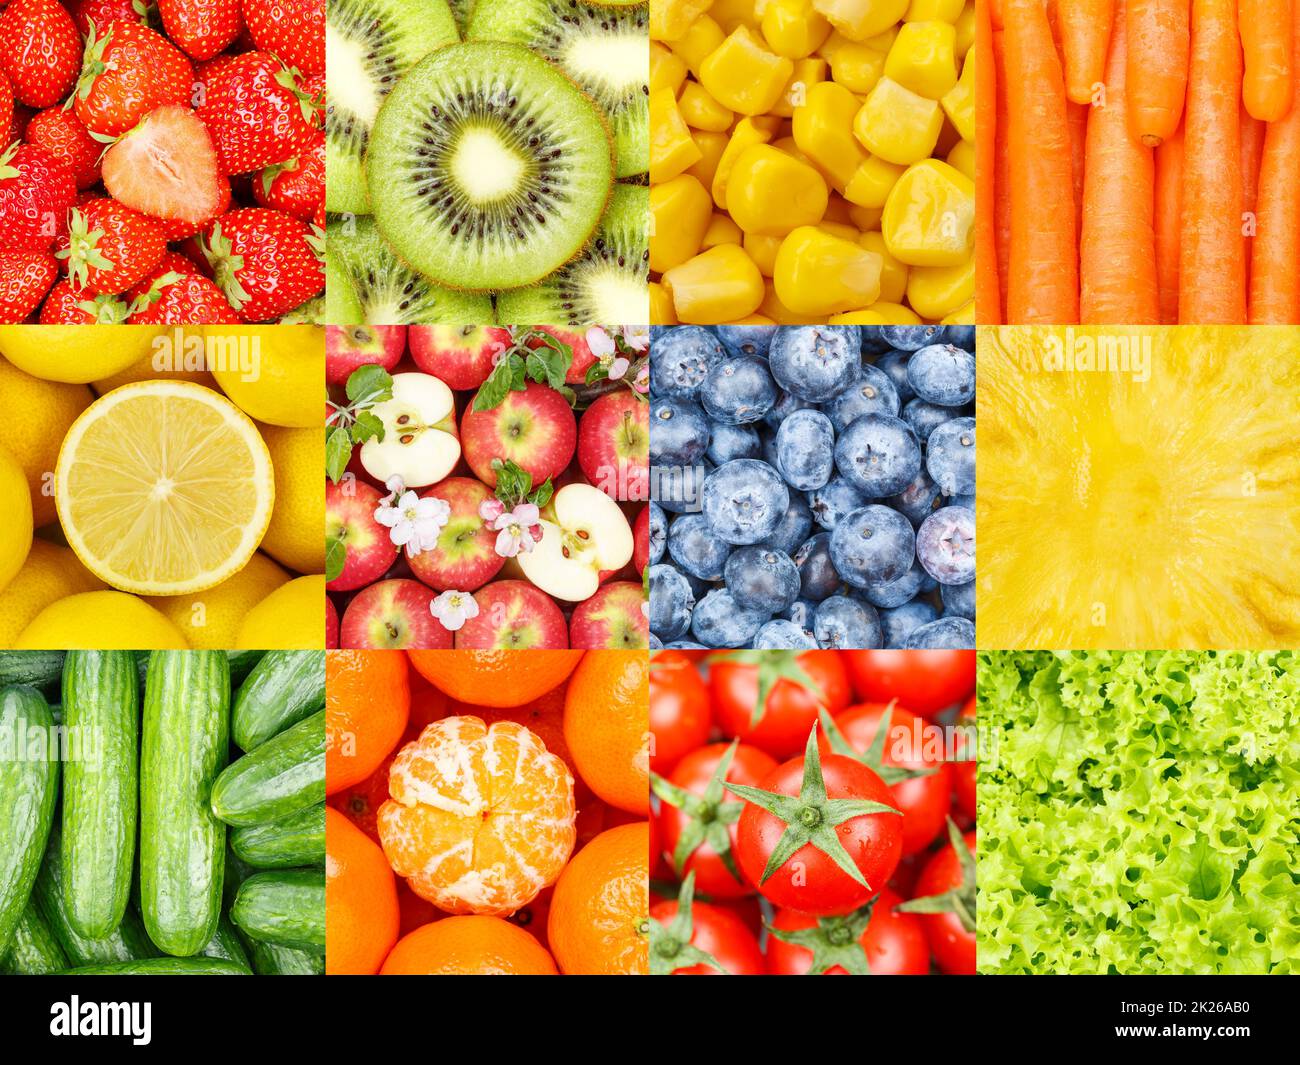 https://c8.alamy.com/comp/2K26AB0/collection-of-fruits-and-vegetables-fruit-collage-background-with-berries-apples-and-carrots-2K26AB0.jpg